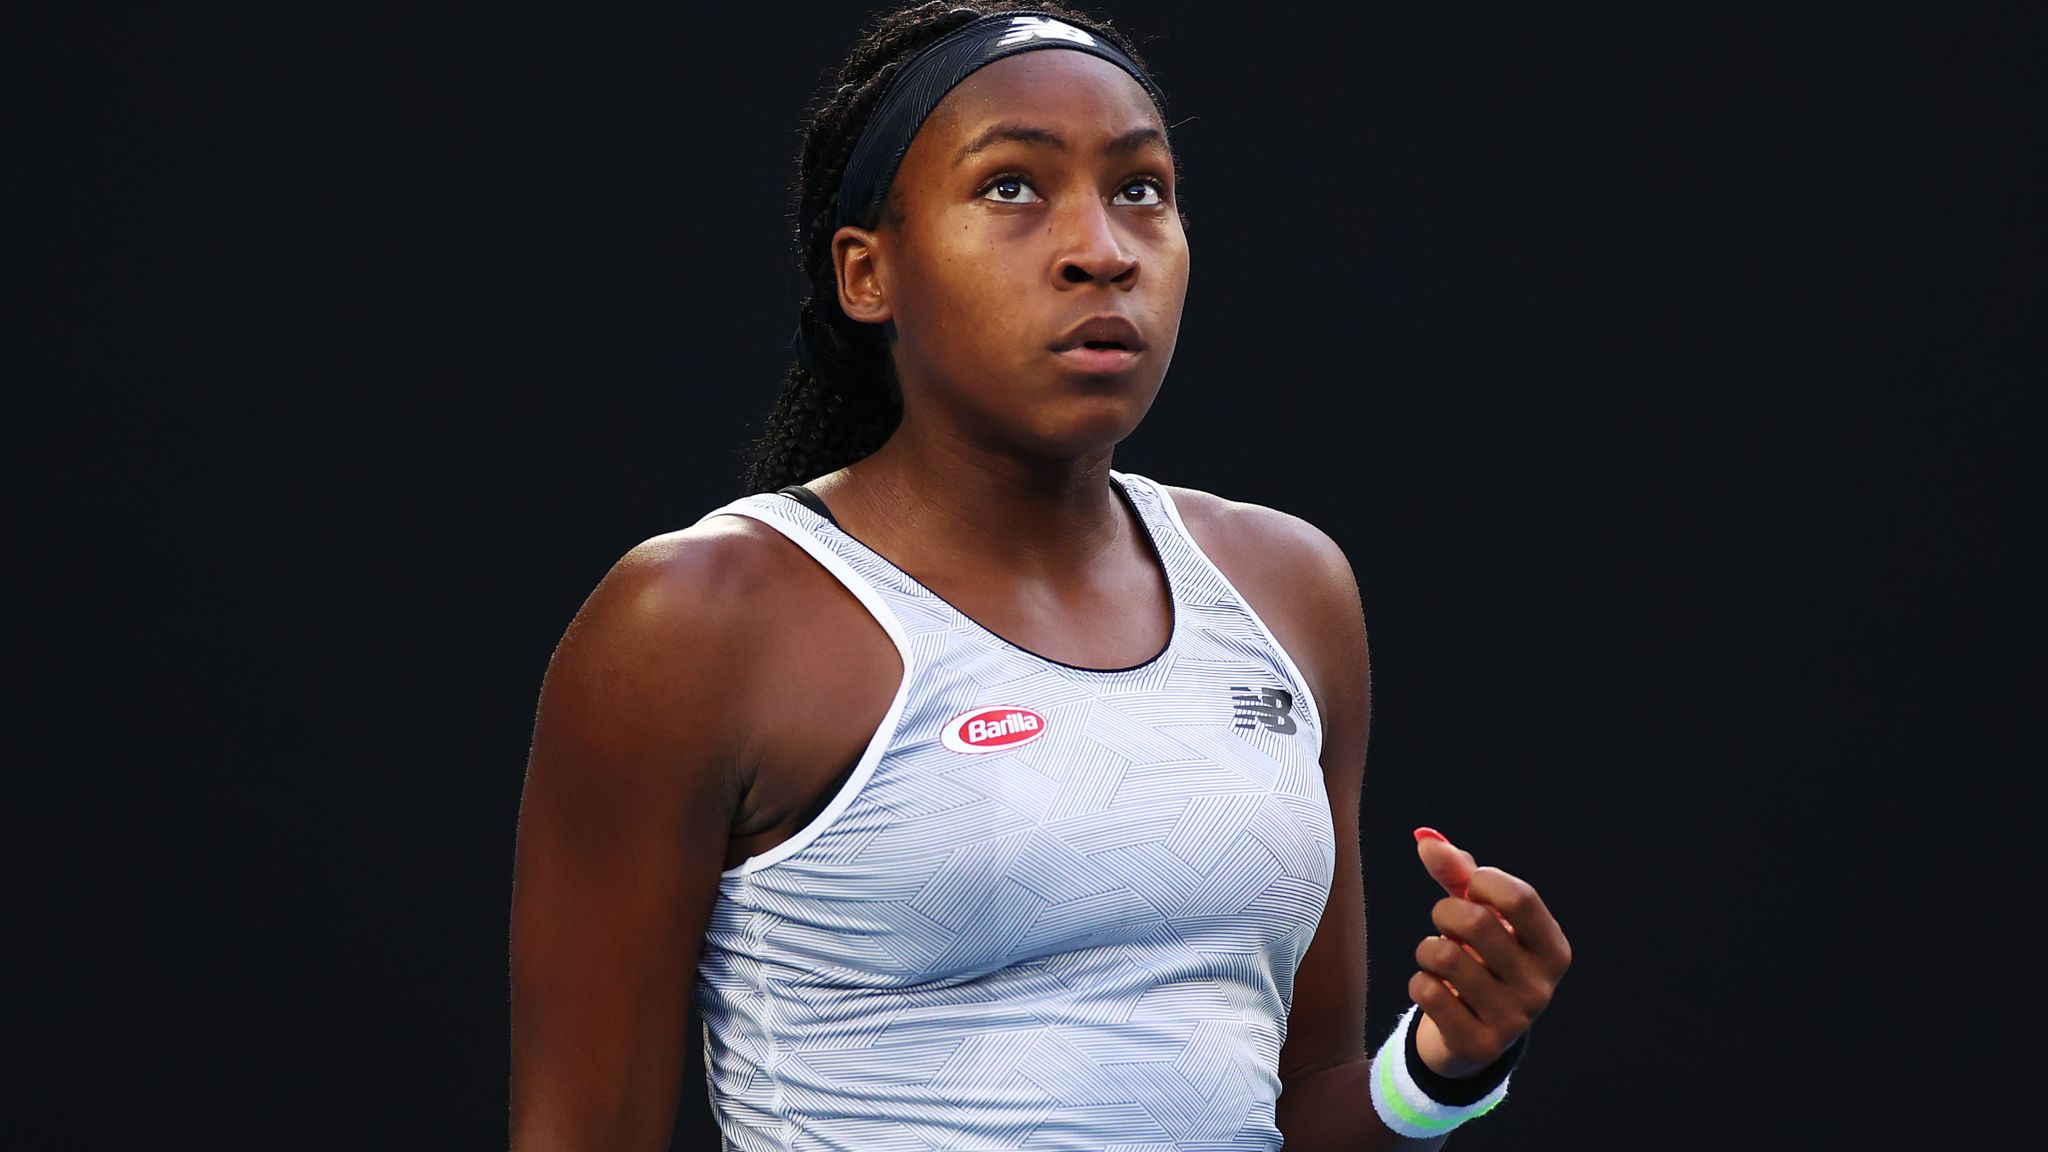 Young tennis sensation Coco Gauff, 16, delivers powerful protest speech  